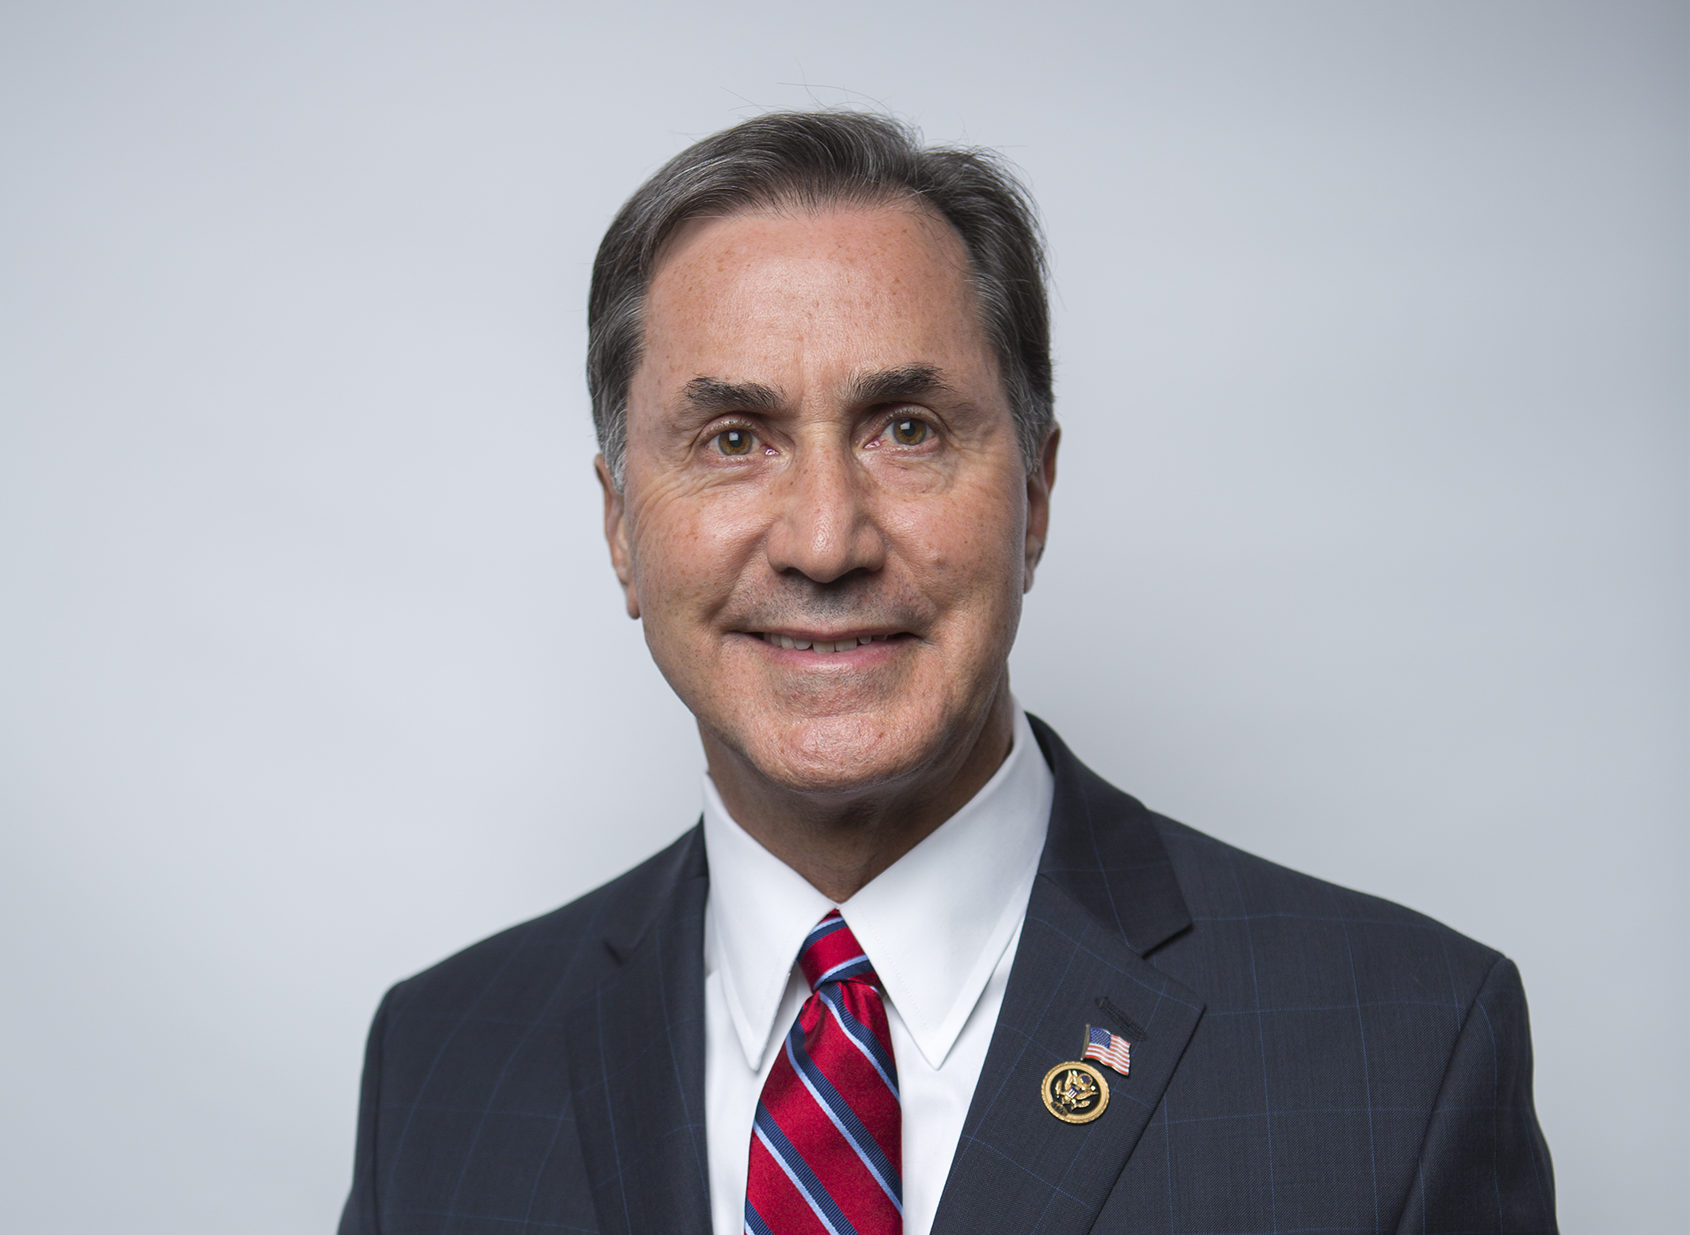 Representative Gary Palmer appointed to 3 new committees